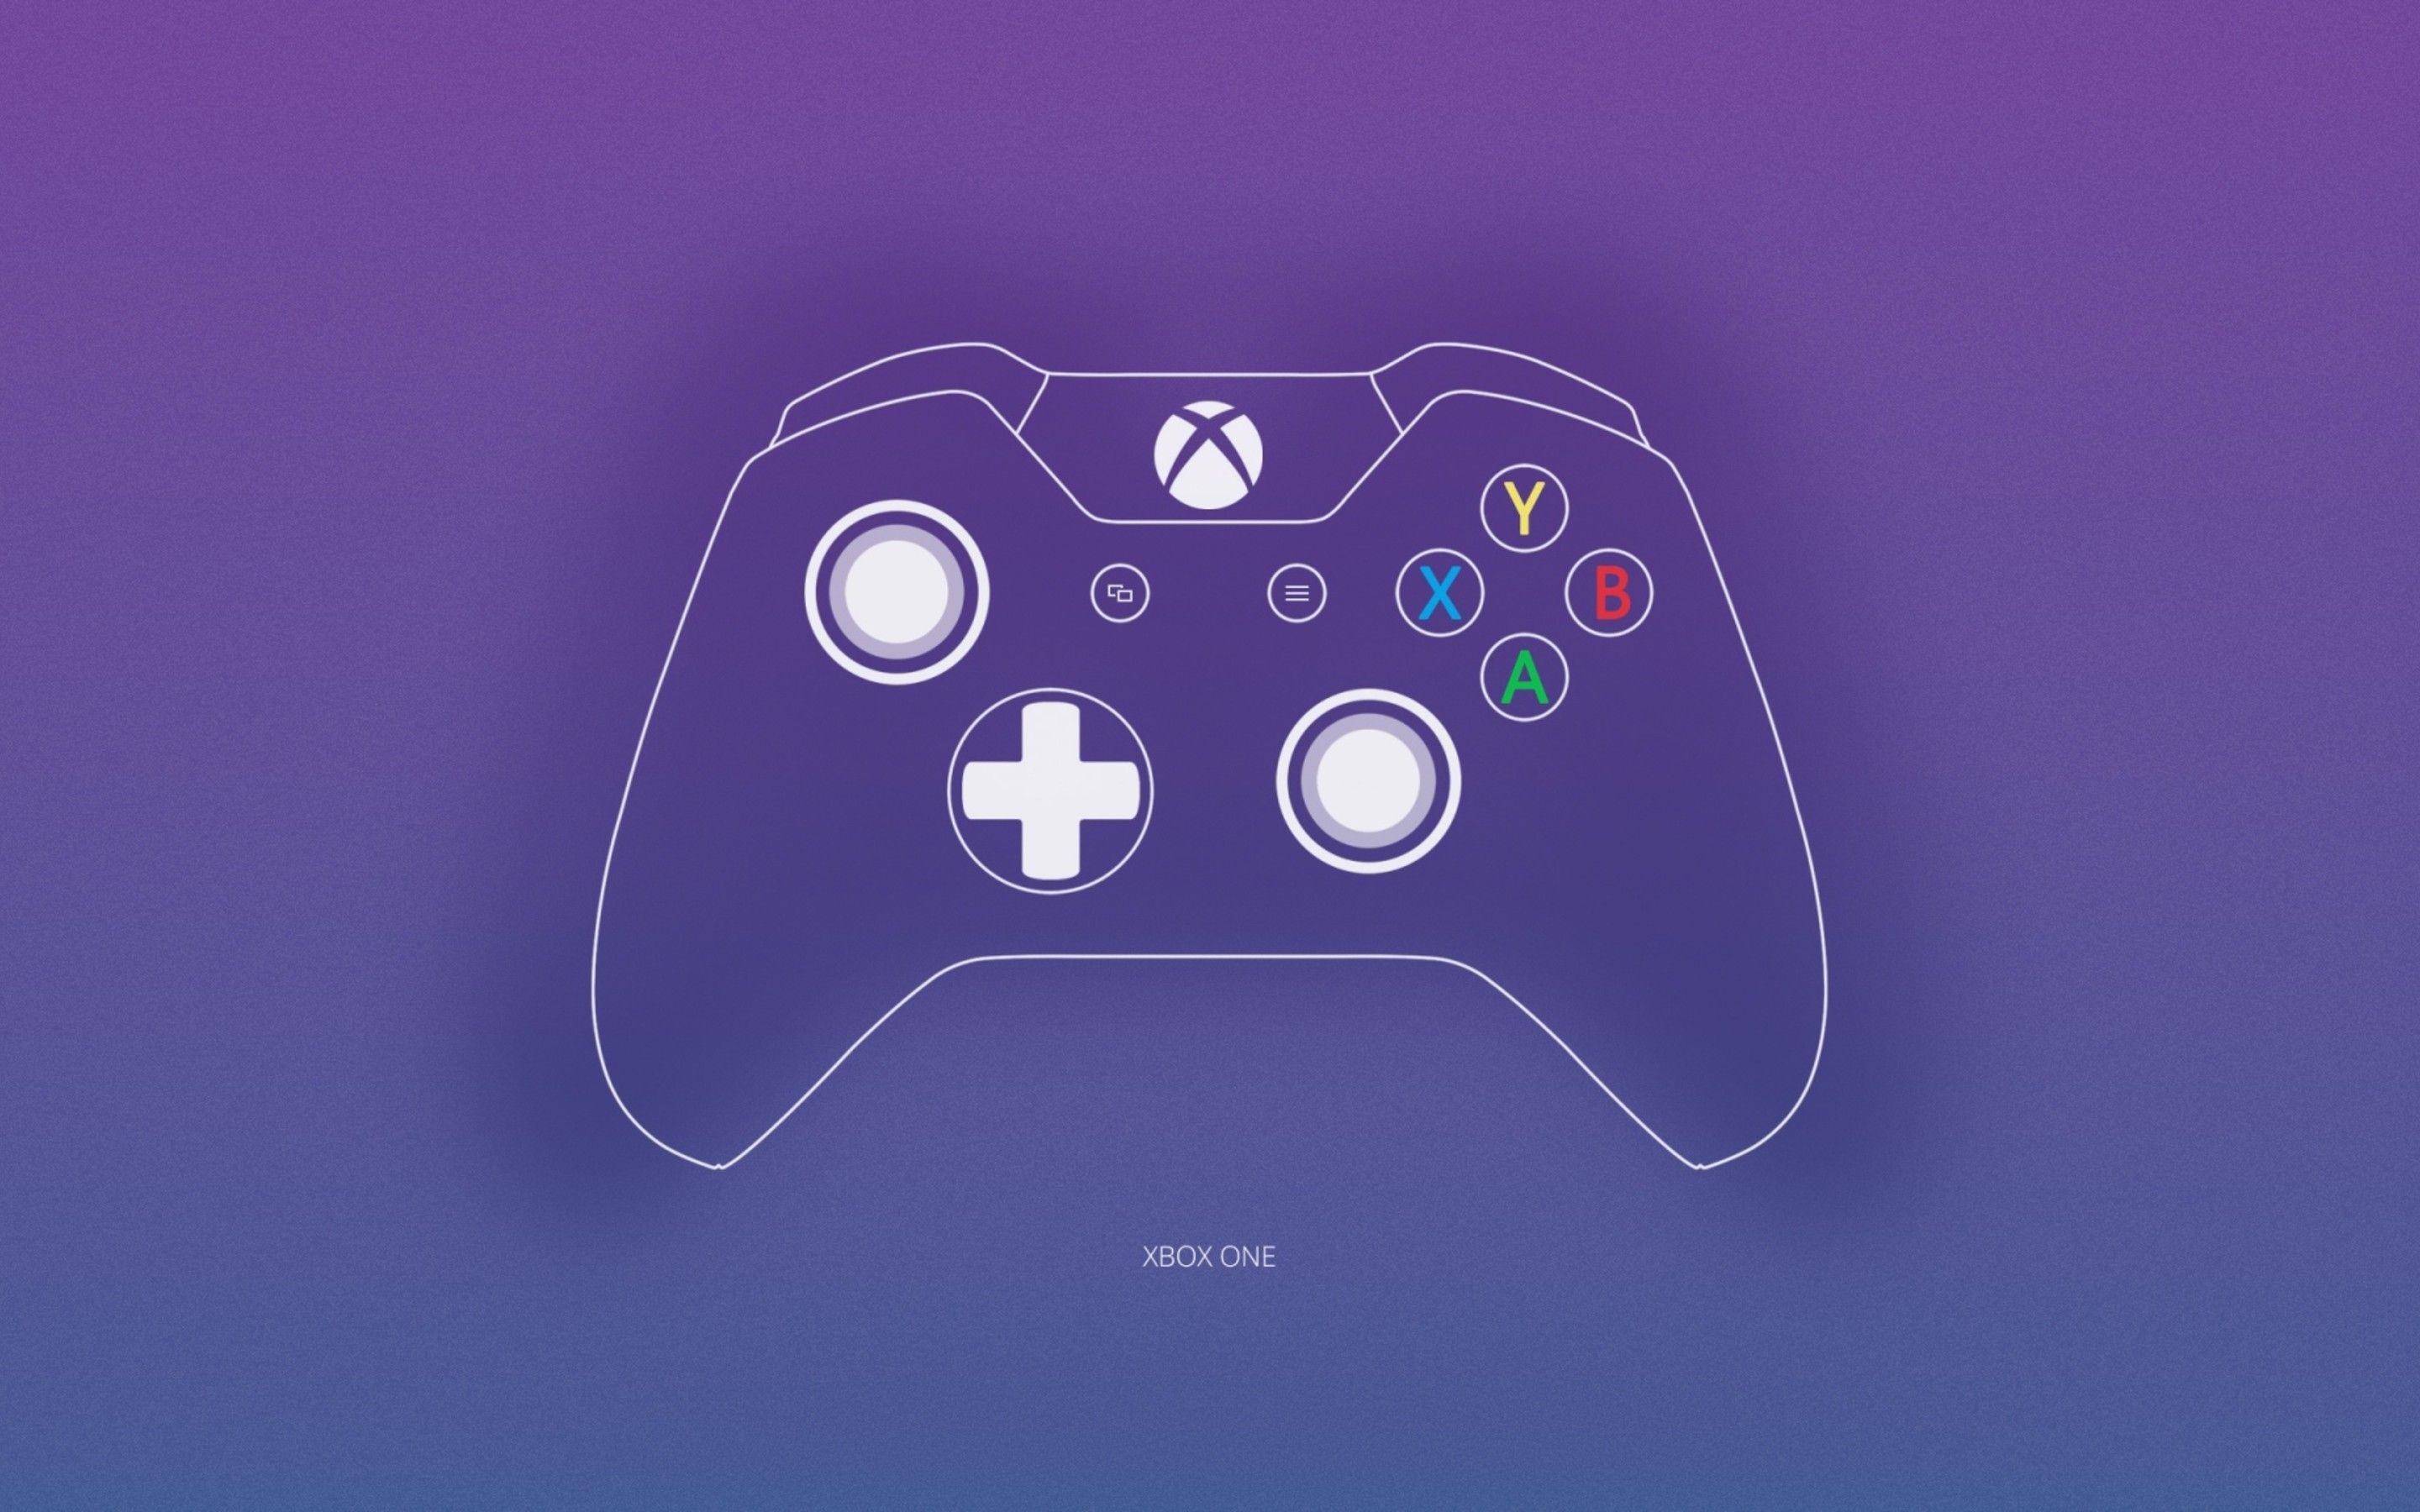 Xbox Controller Wallpapers Top Free Xbox Controller Backgrounds Wallpaperaccess 4,000+ vectors, stock photos & psd files. xbox controller wallpapers top free